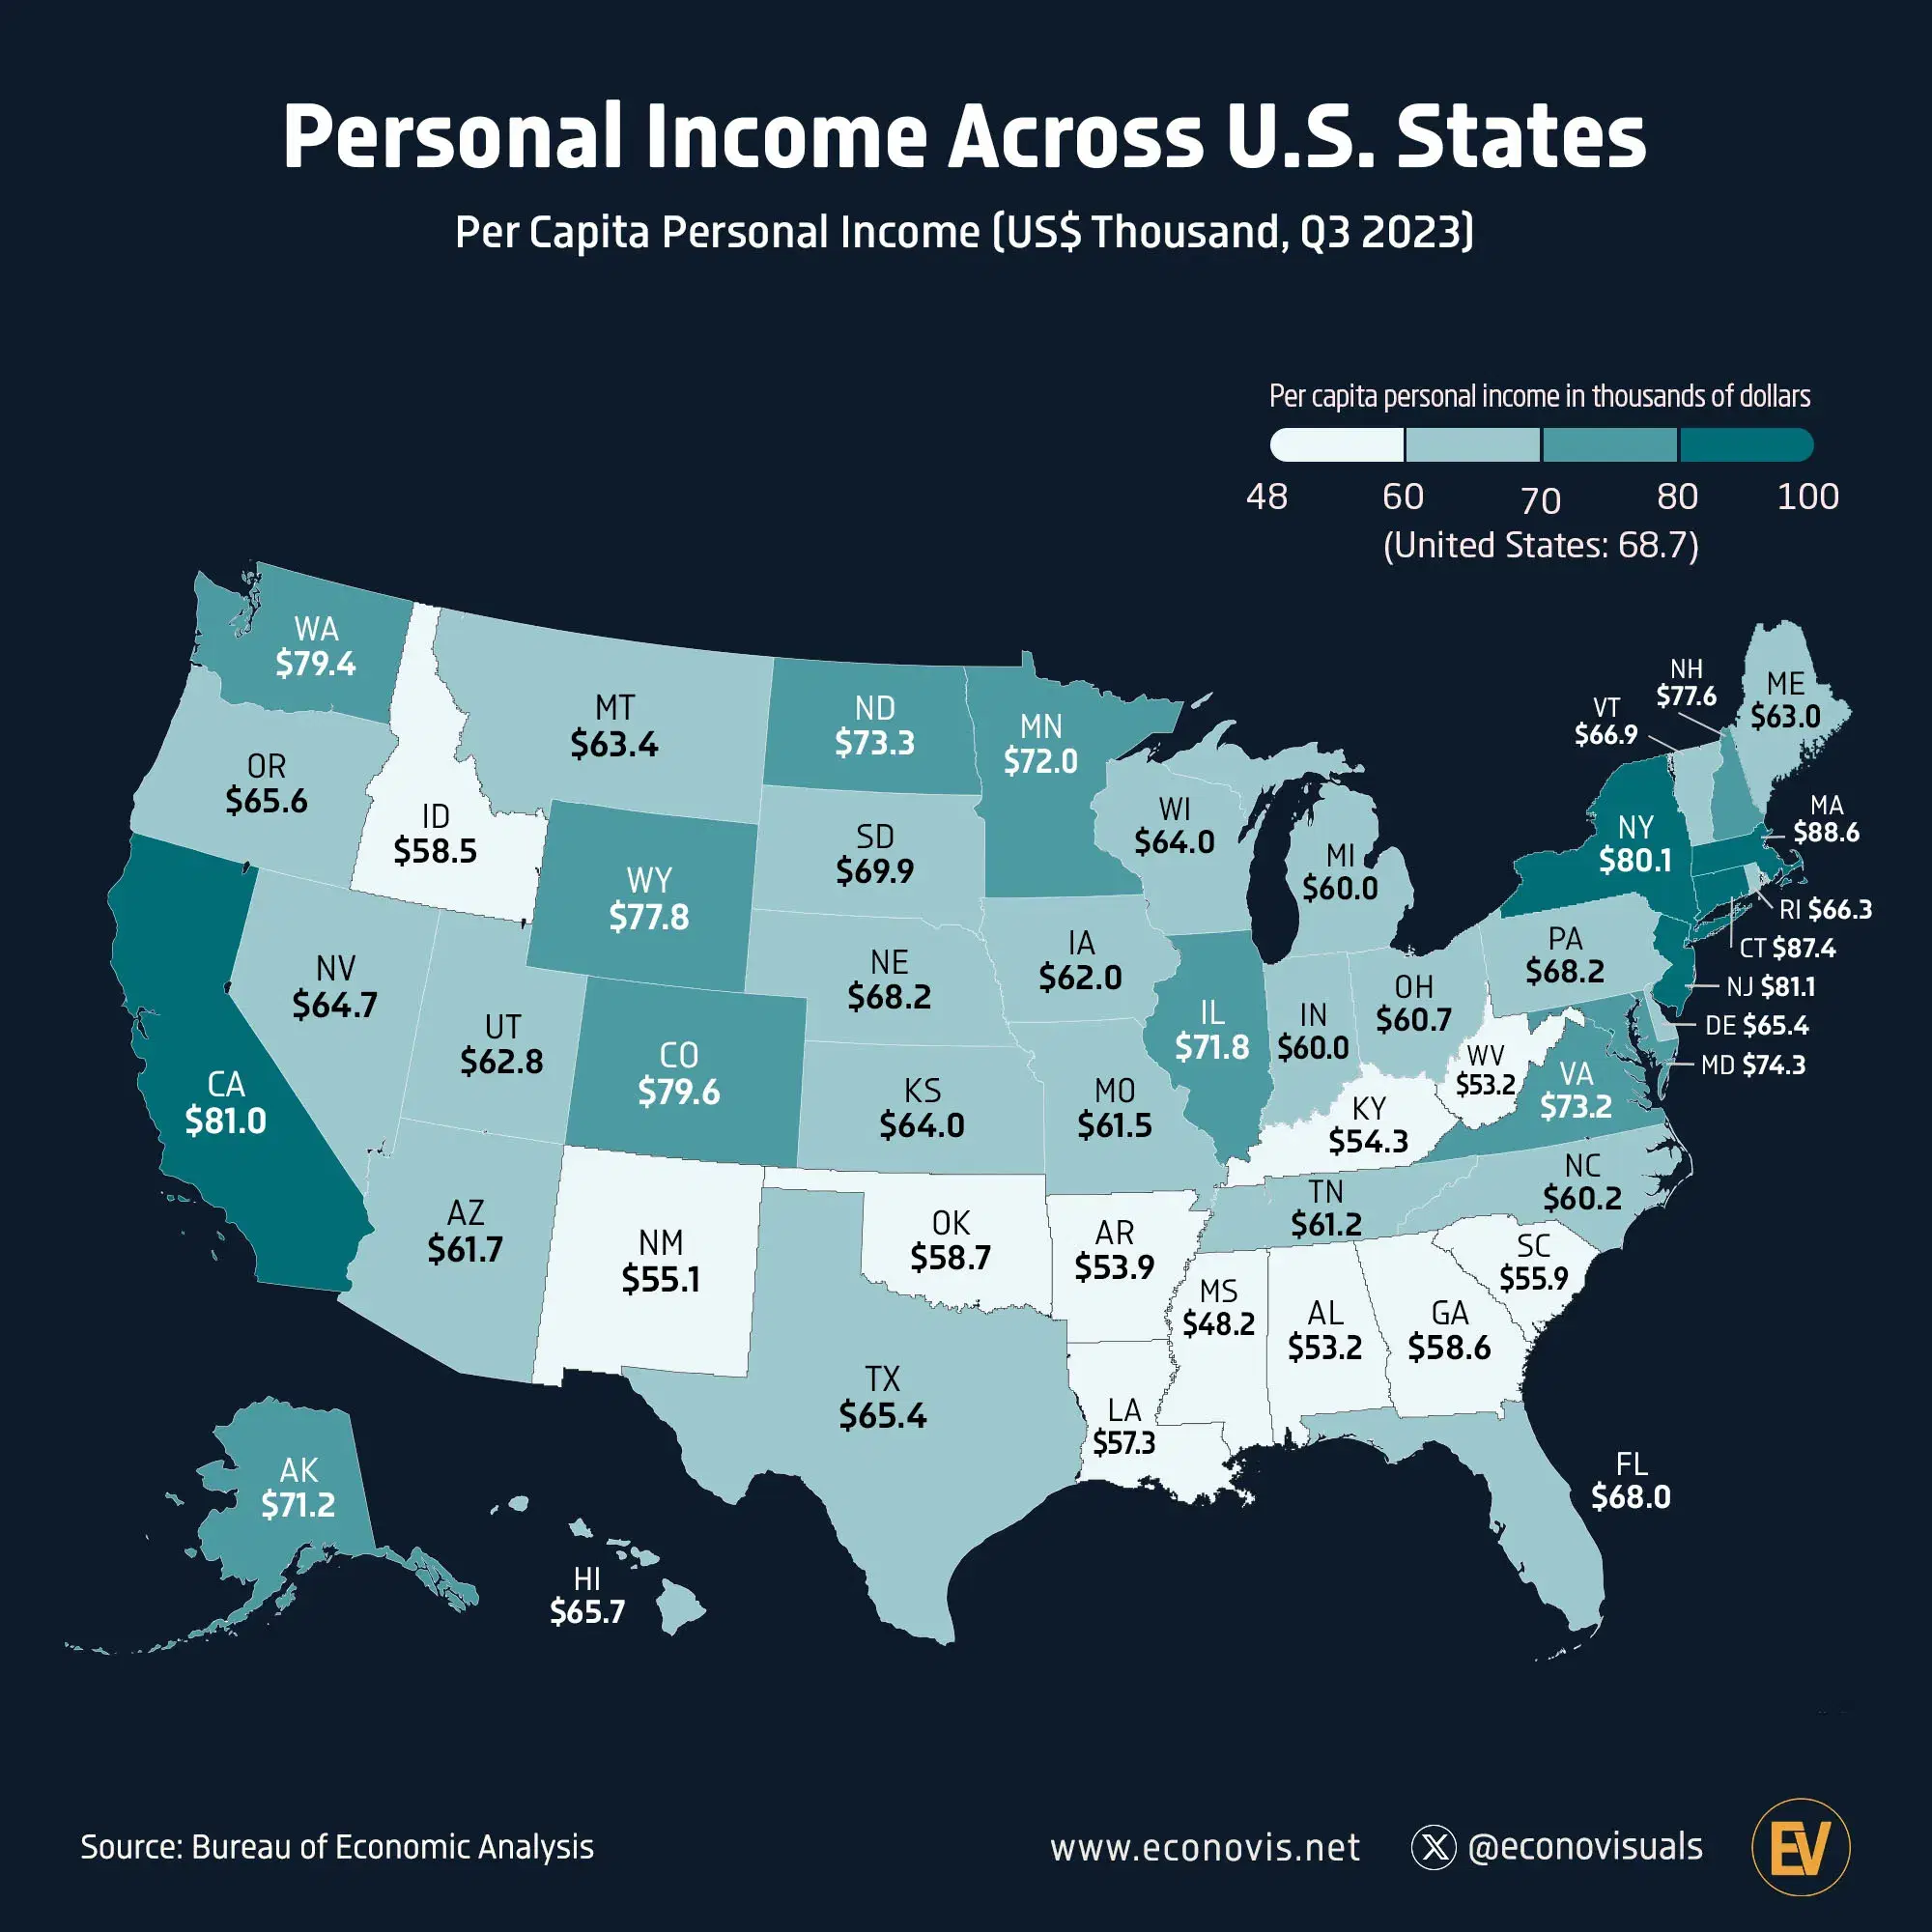 Personal Income Across U.S. States